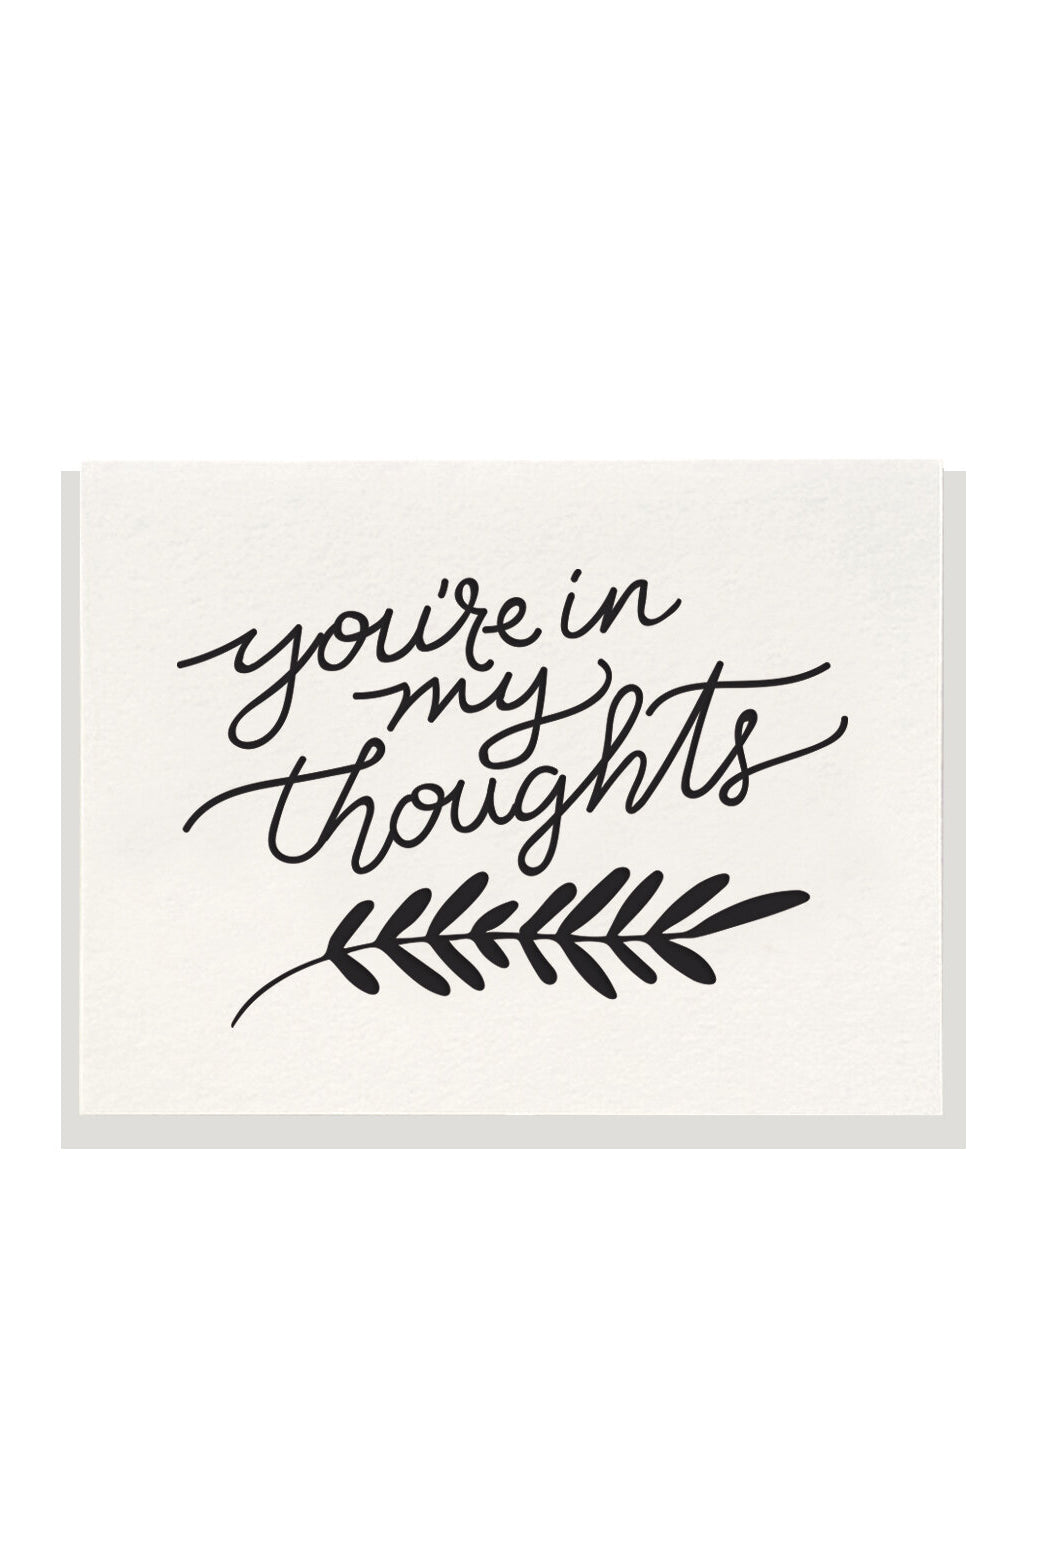 You're In My Thoughts - Letterpress Sympathy Card